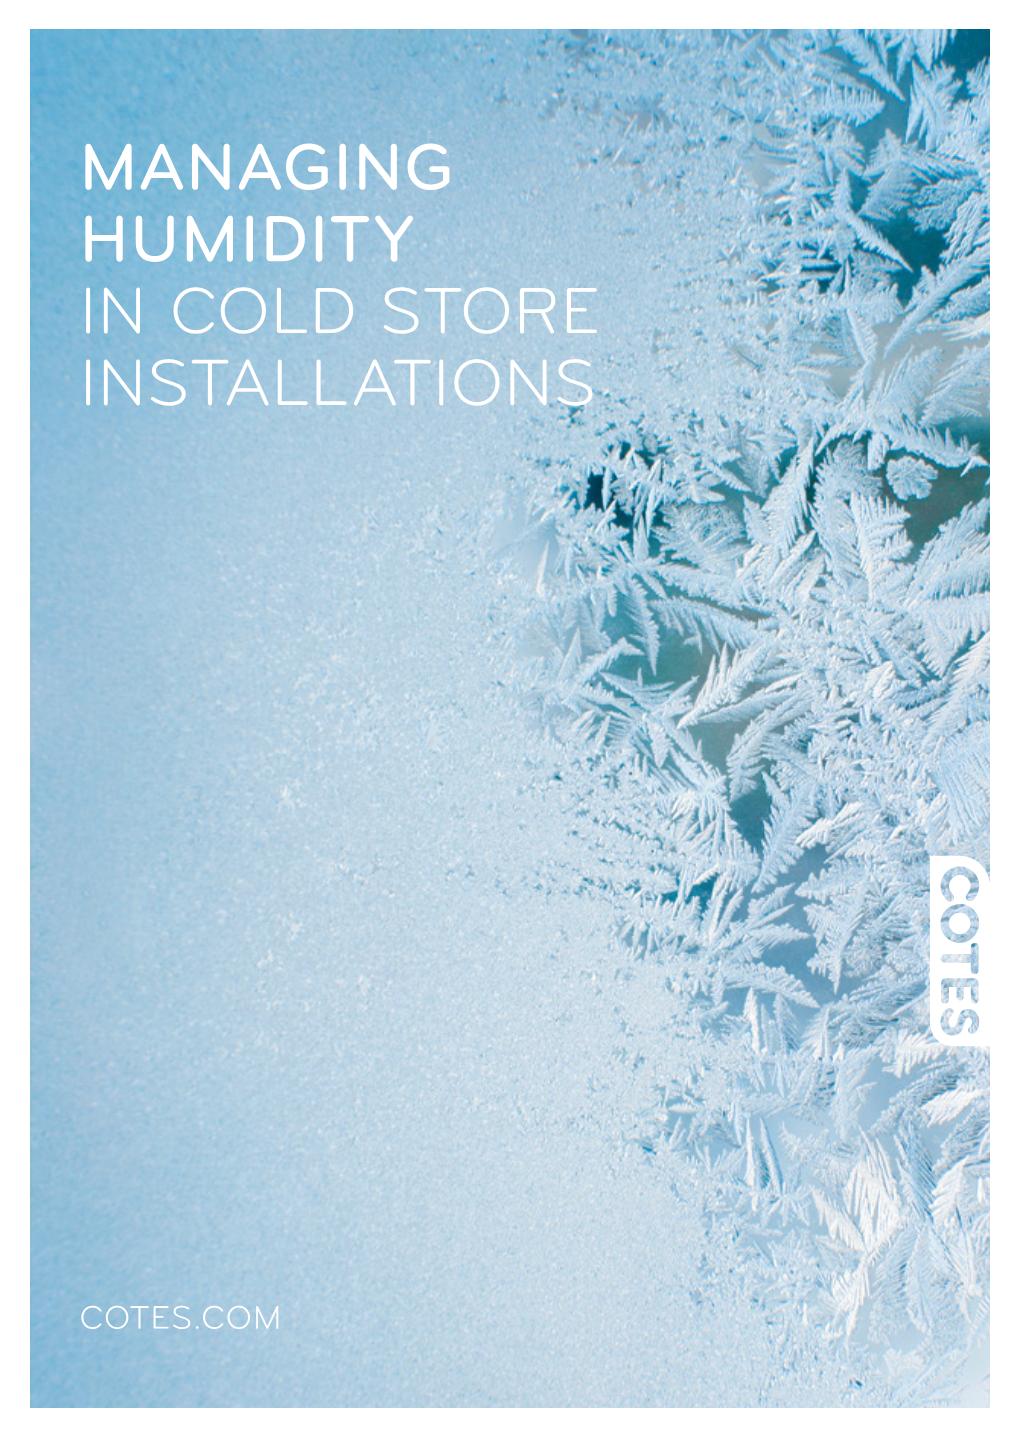 Managing Humidity in Cold Store Installations